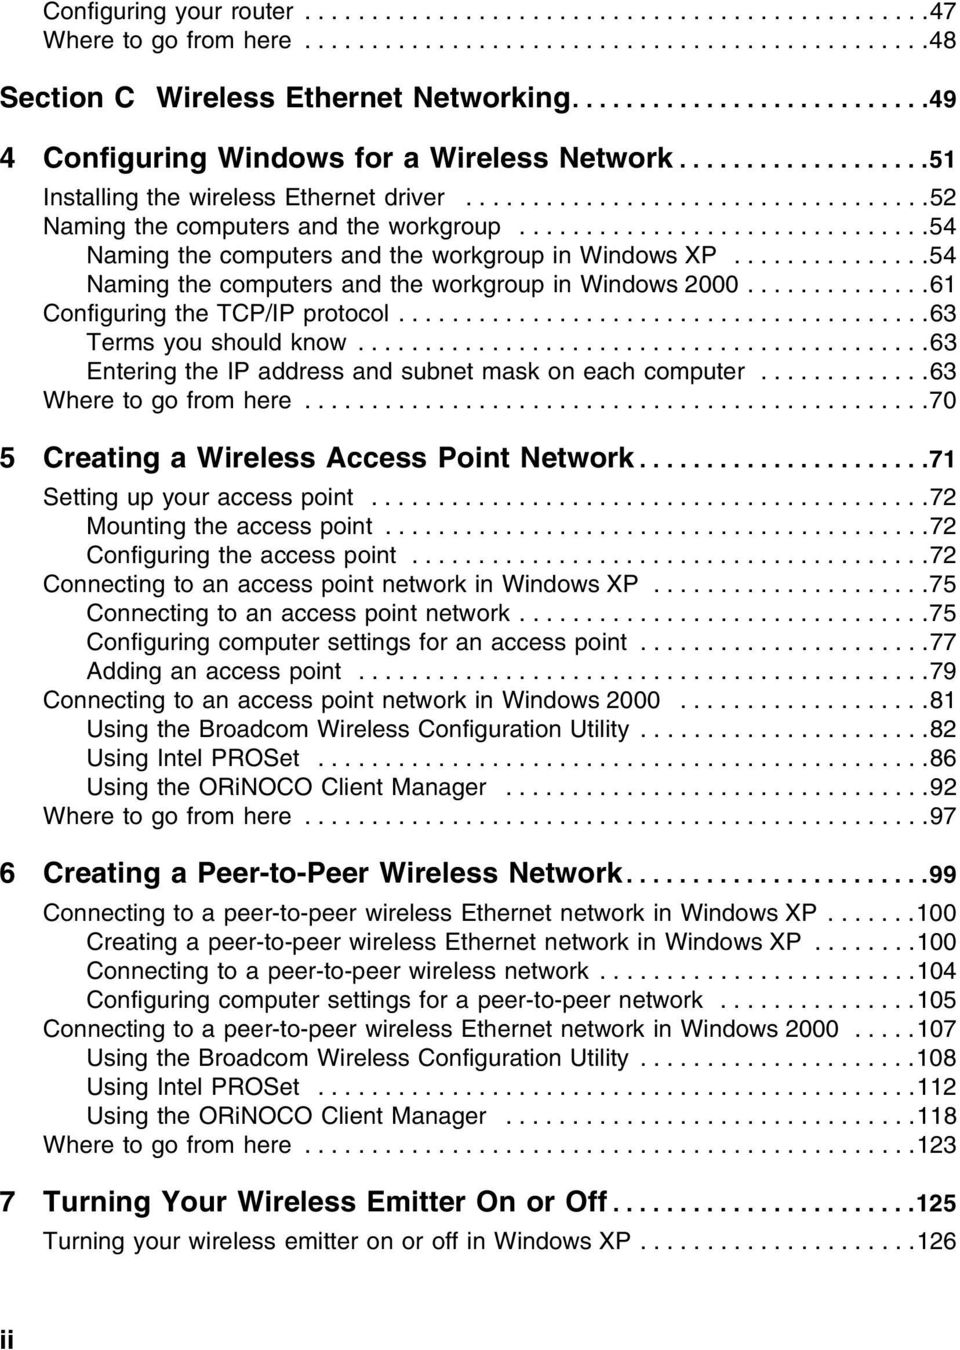 ..............................54 Naming the computers and the workgroup in Windows XP...............54 Naming the computers and the workgroup in Windows 2000..............61 Configuring the TCP/IP protocol.